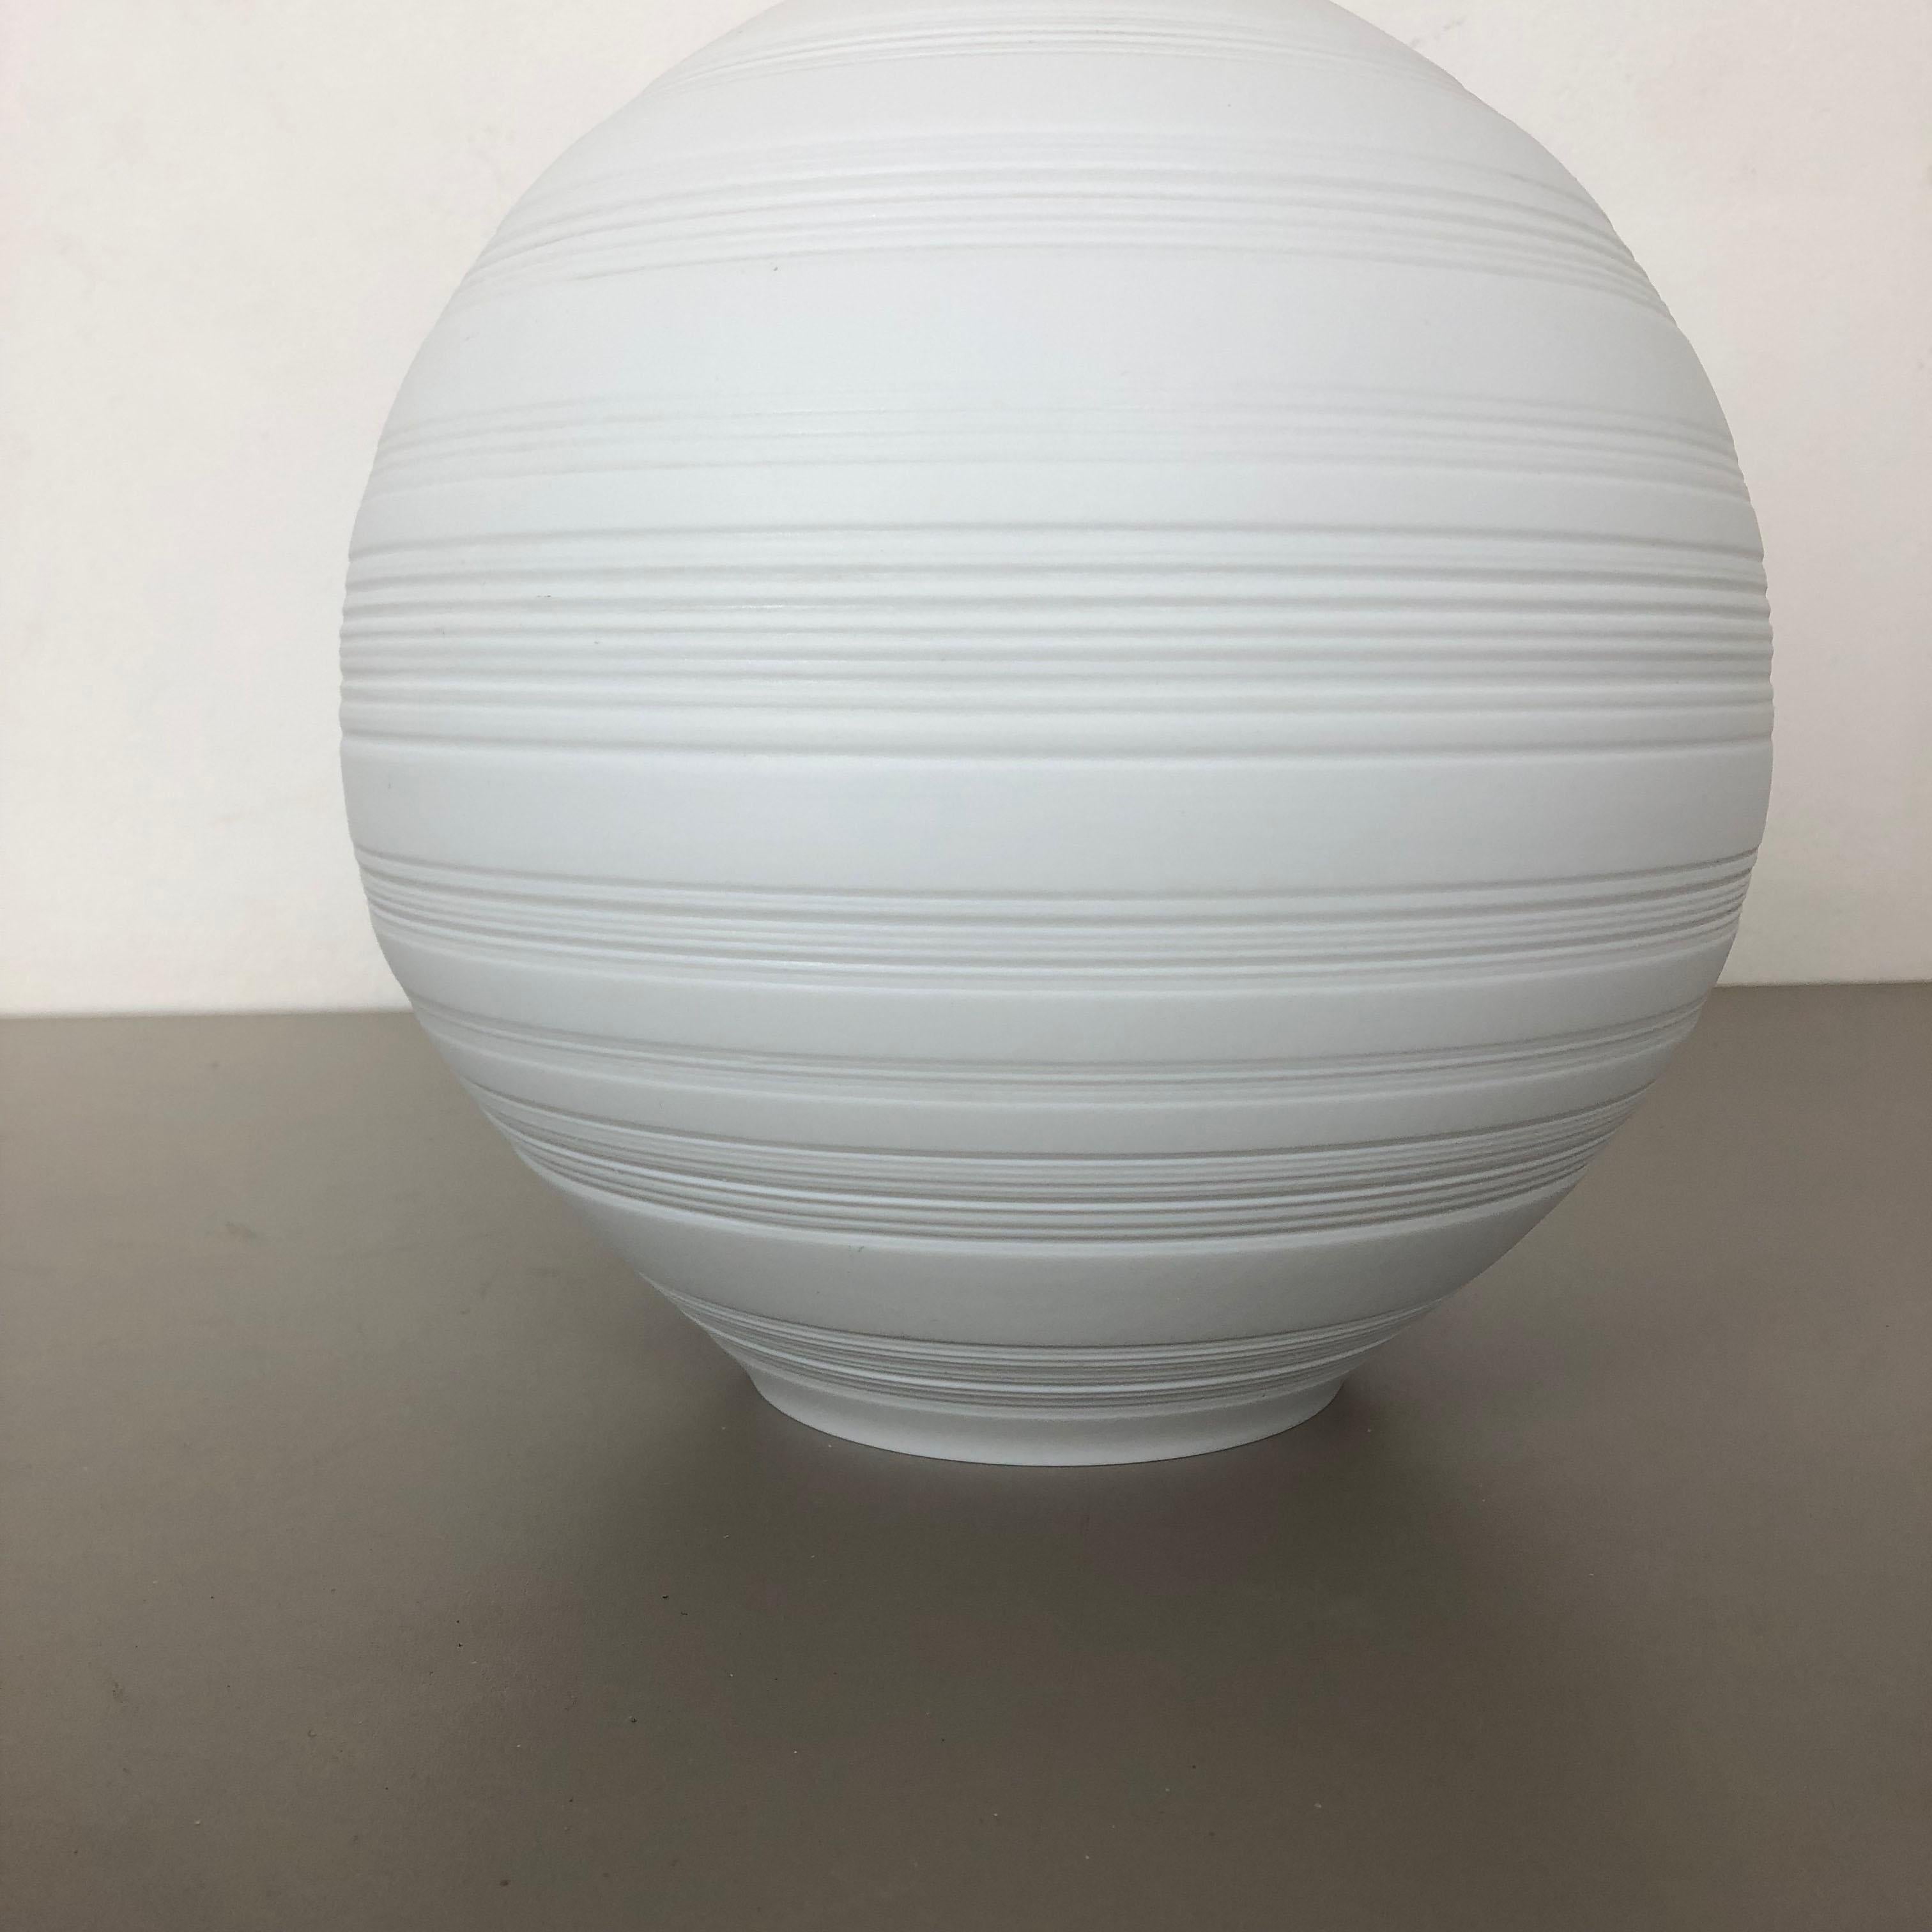 OP Art Vase Biscuit Porcelain by Hans Achtziger for Hutschenreuther, 1970s For Sale 2